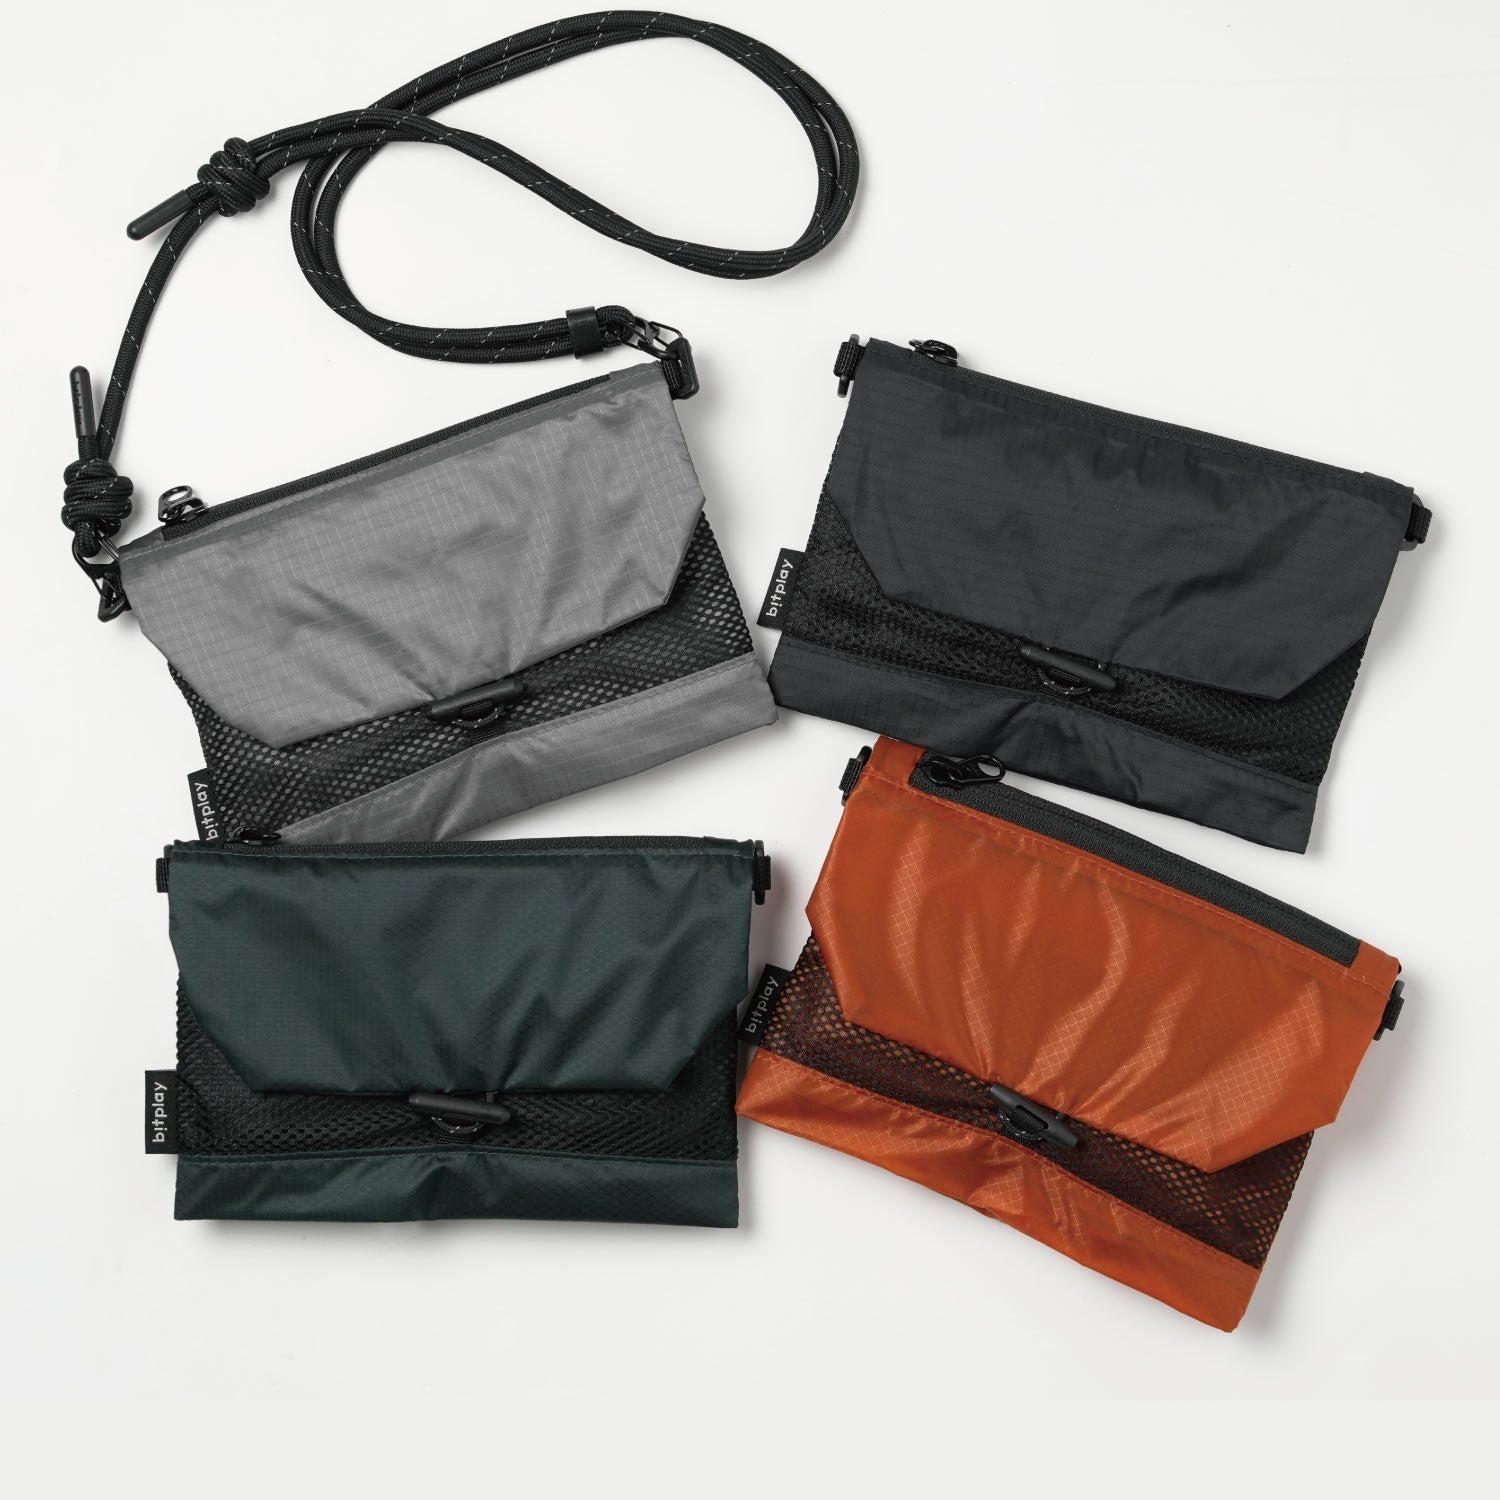 Foldable 2-Way Bag x 33 special edition